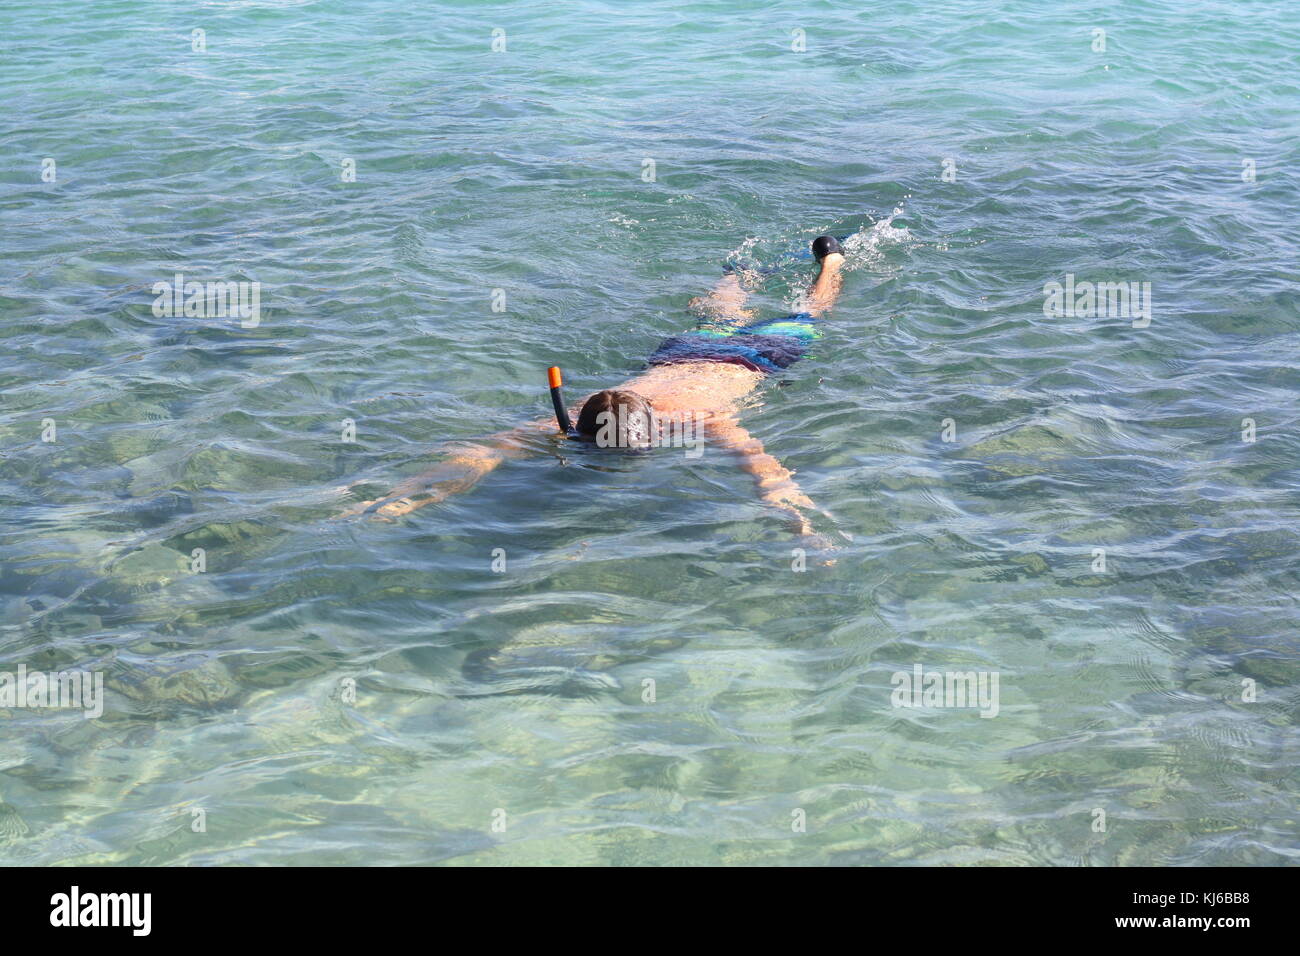 A snorkel diving in the beach sea water, to find shells and observe fish. Stock Photo